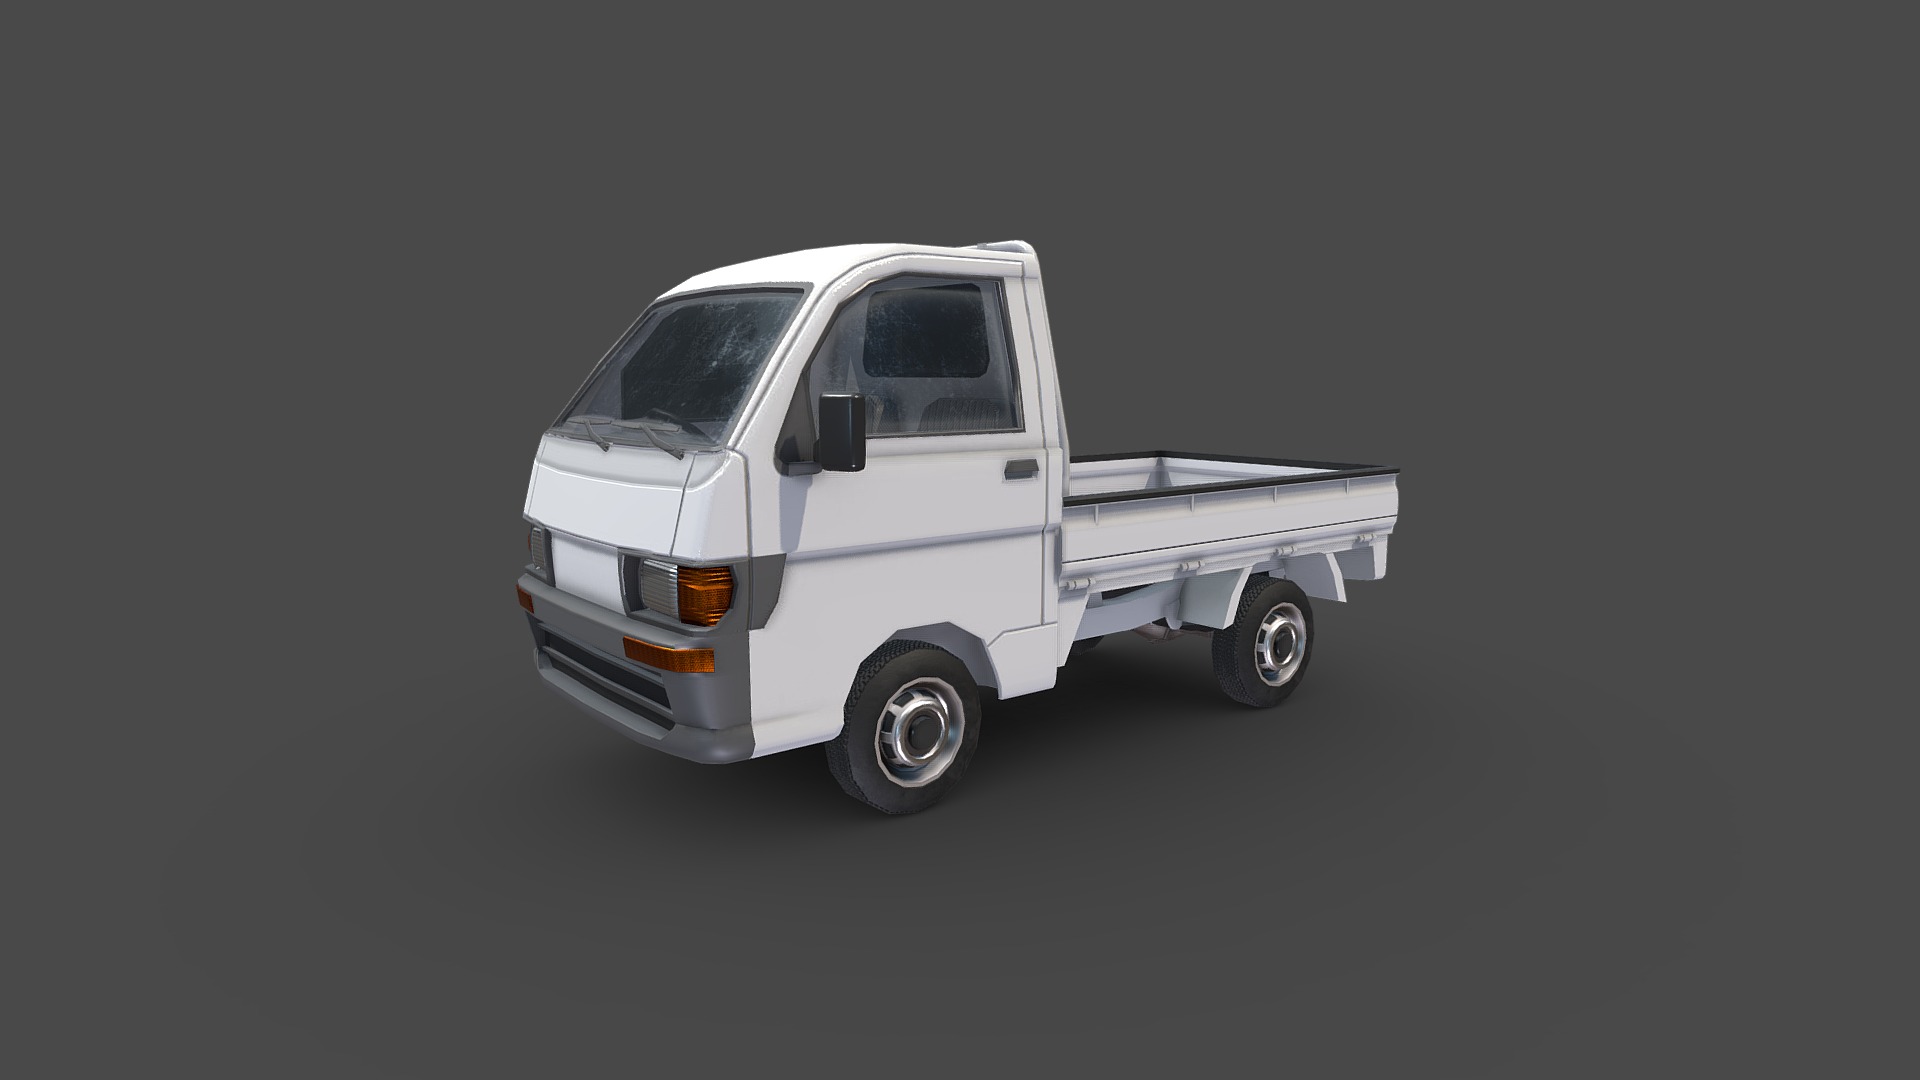 3D model Asian Mini Truck - This is a 3D model of the Asian Mini Truck. The 3D model is about a white truck with a flat bed.